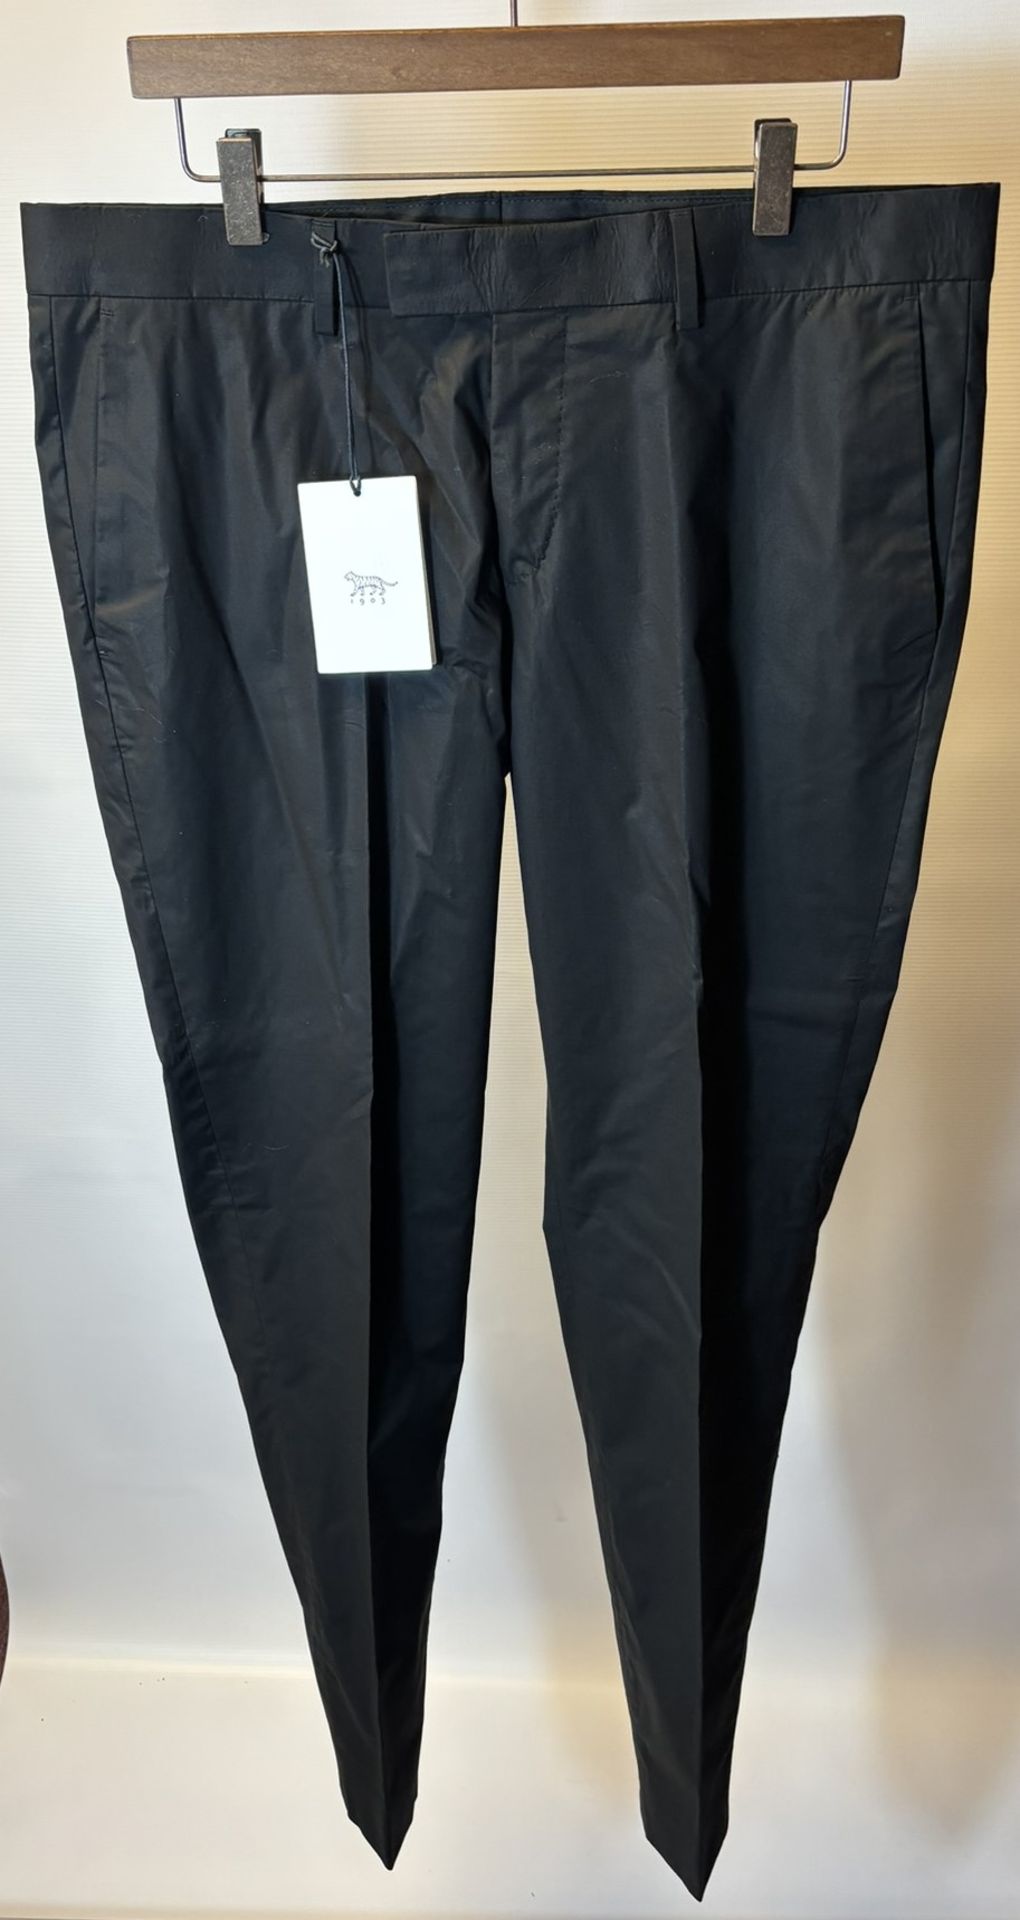 15 x Various Pairs Of Women's Trousers As Seen In Photos - Image 22 of 45